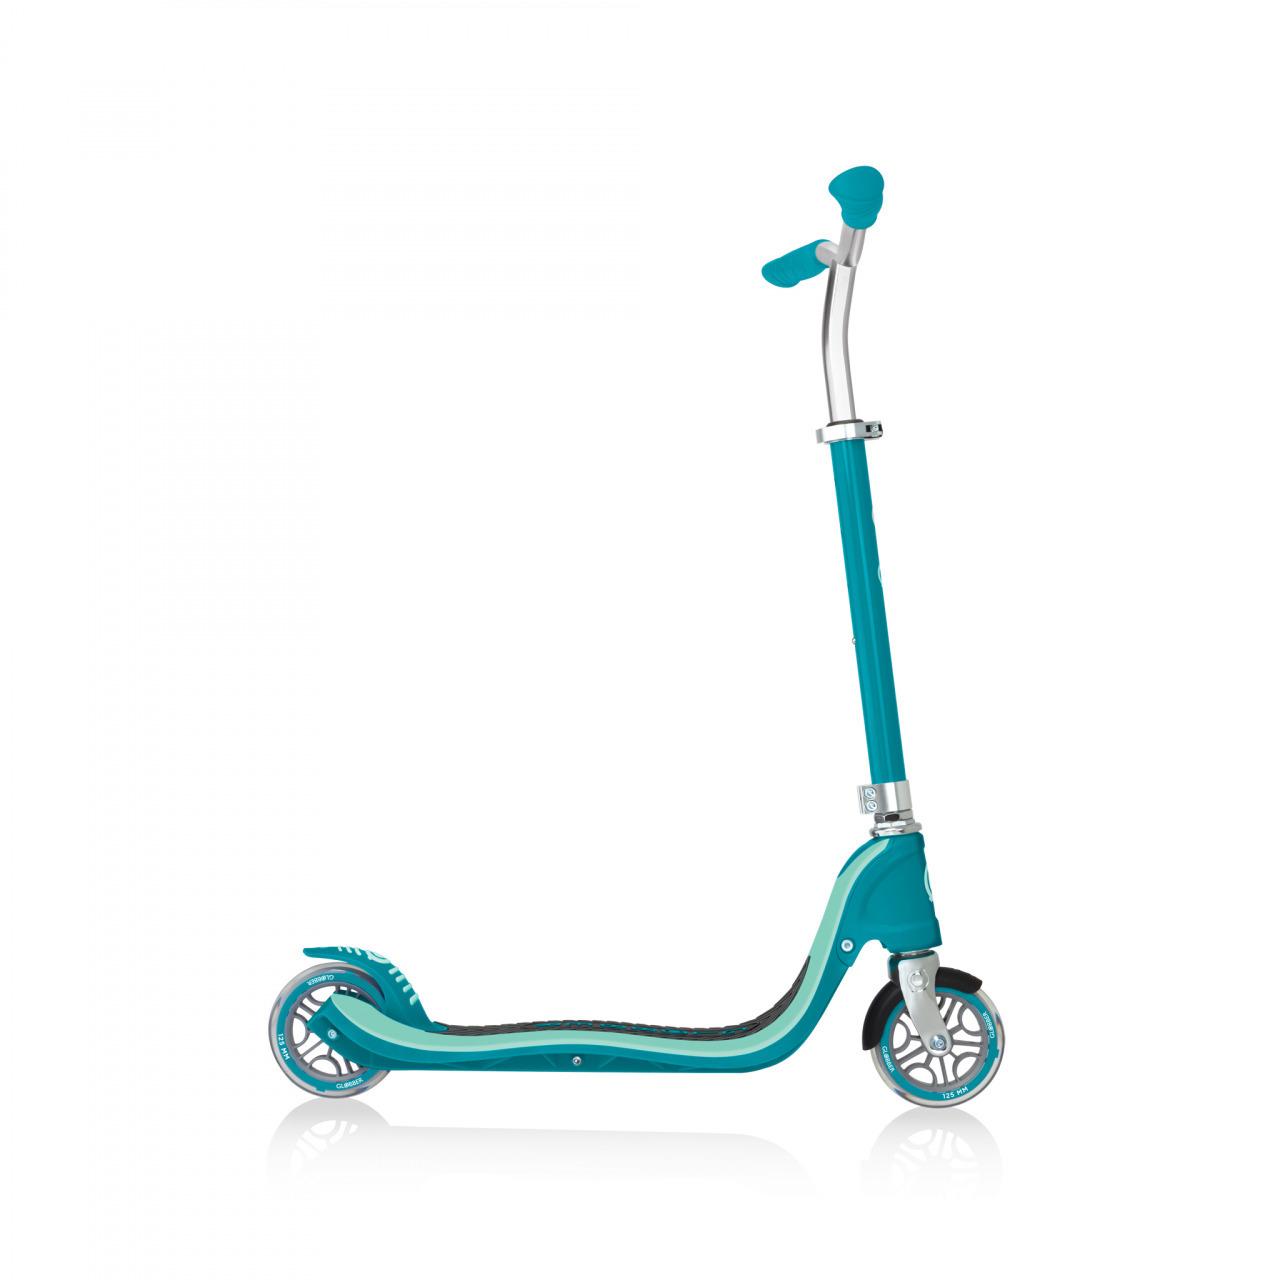 770 105 Scooter For Teens